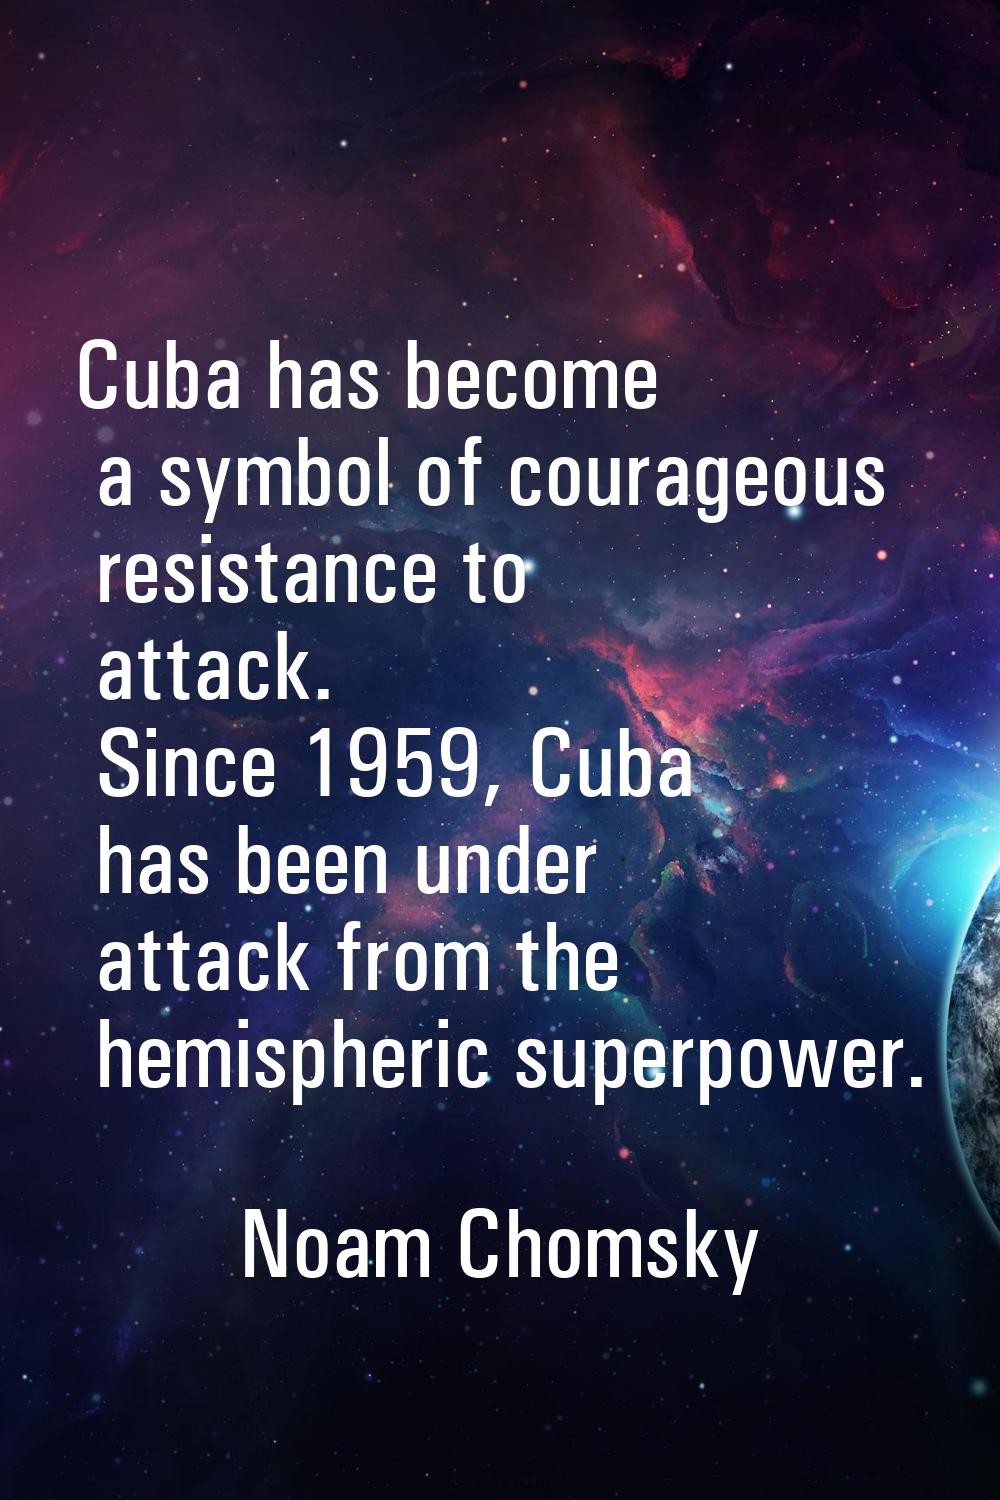 Cuba has become a symbol of courageous resistance to attack. Since 1959, Cuba has been under attack